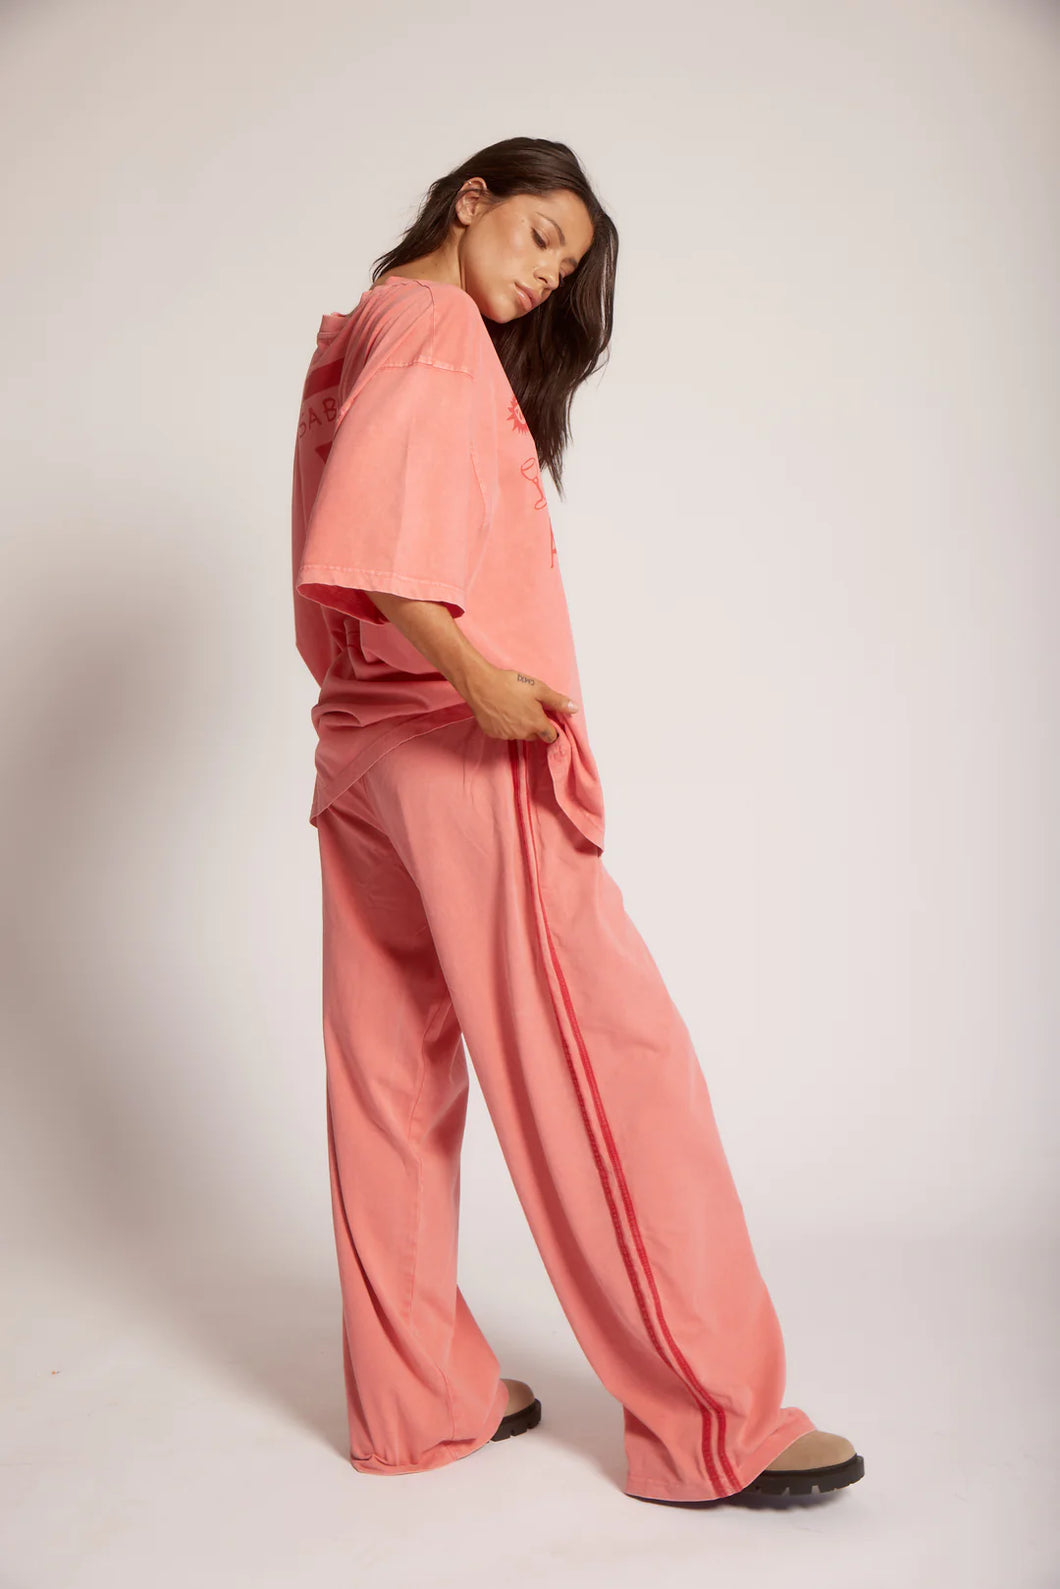 THE PADRE CROPPED PANTS - APEROL MELON